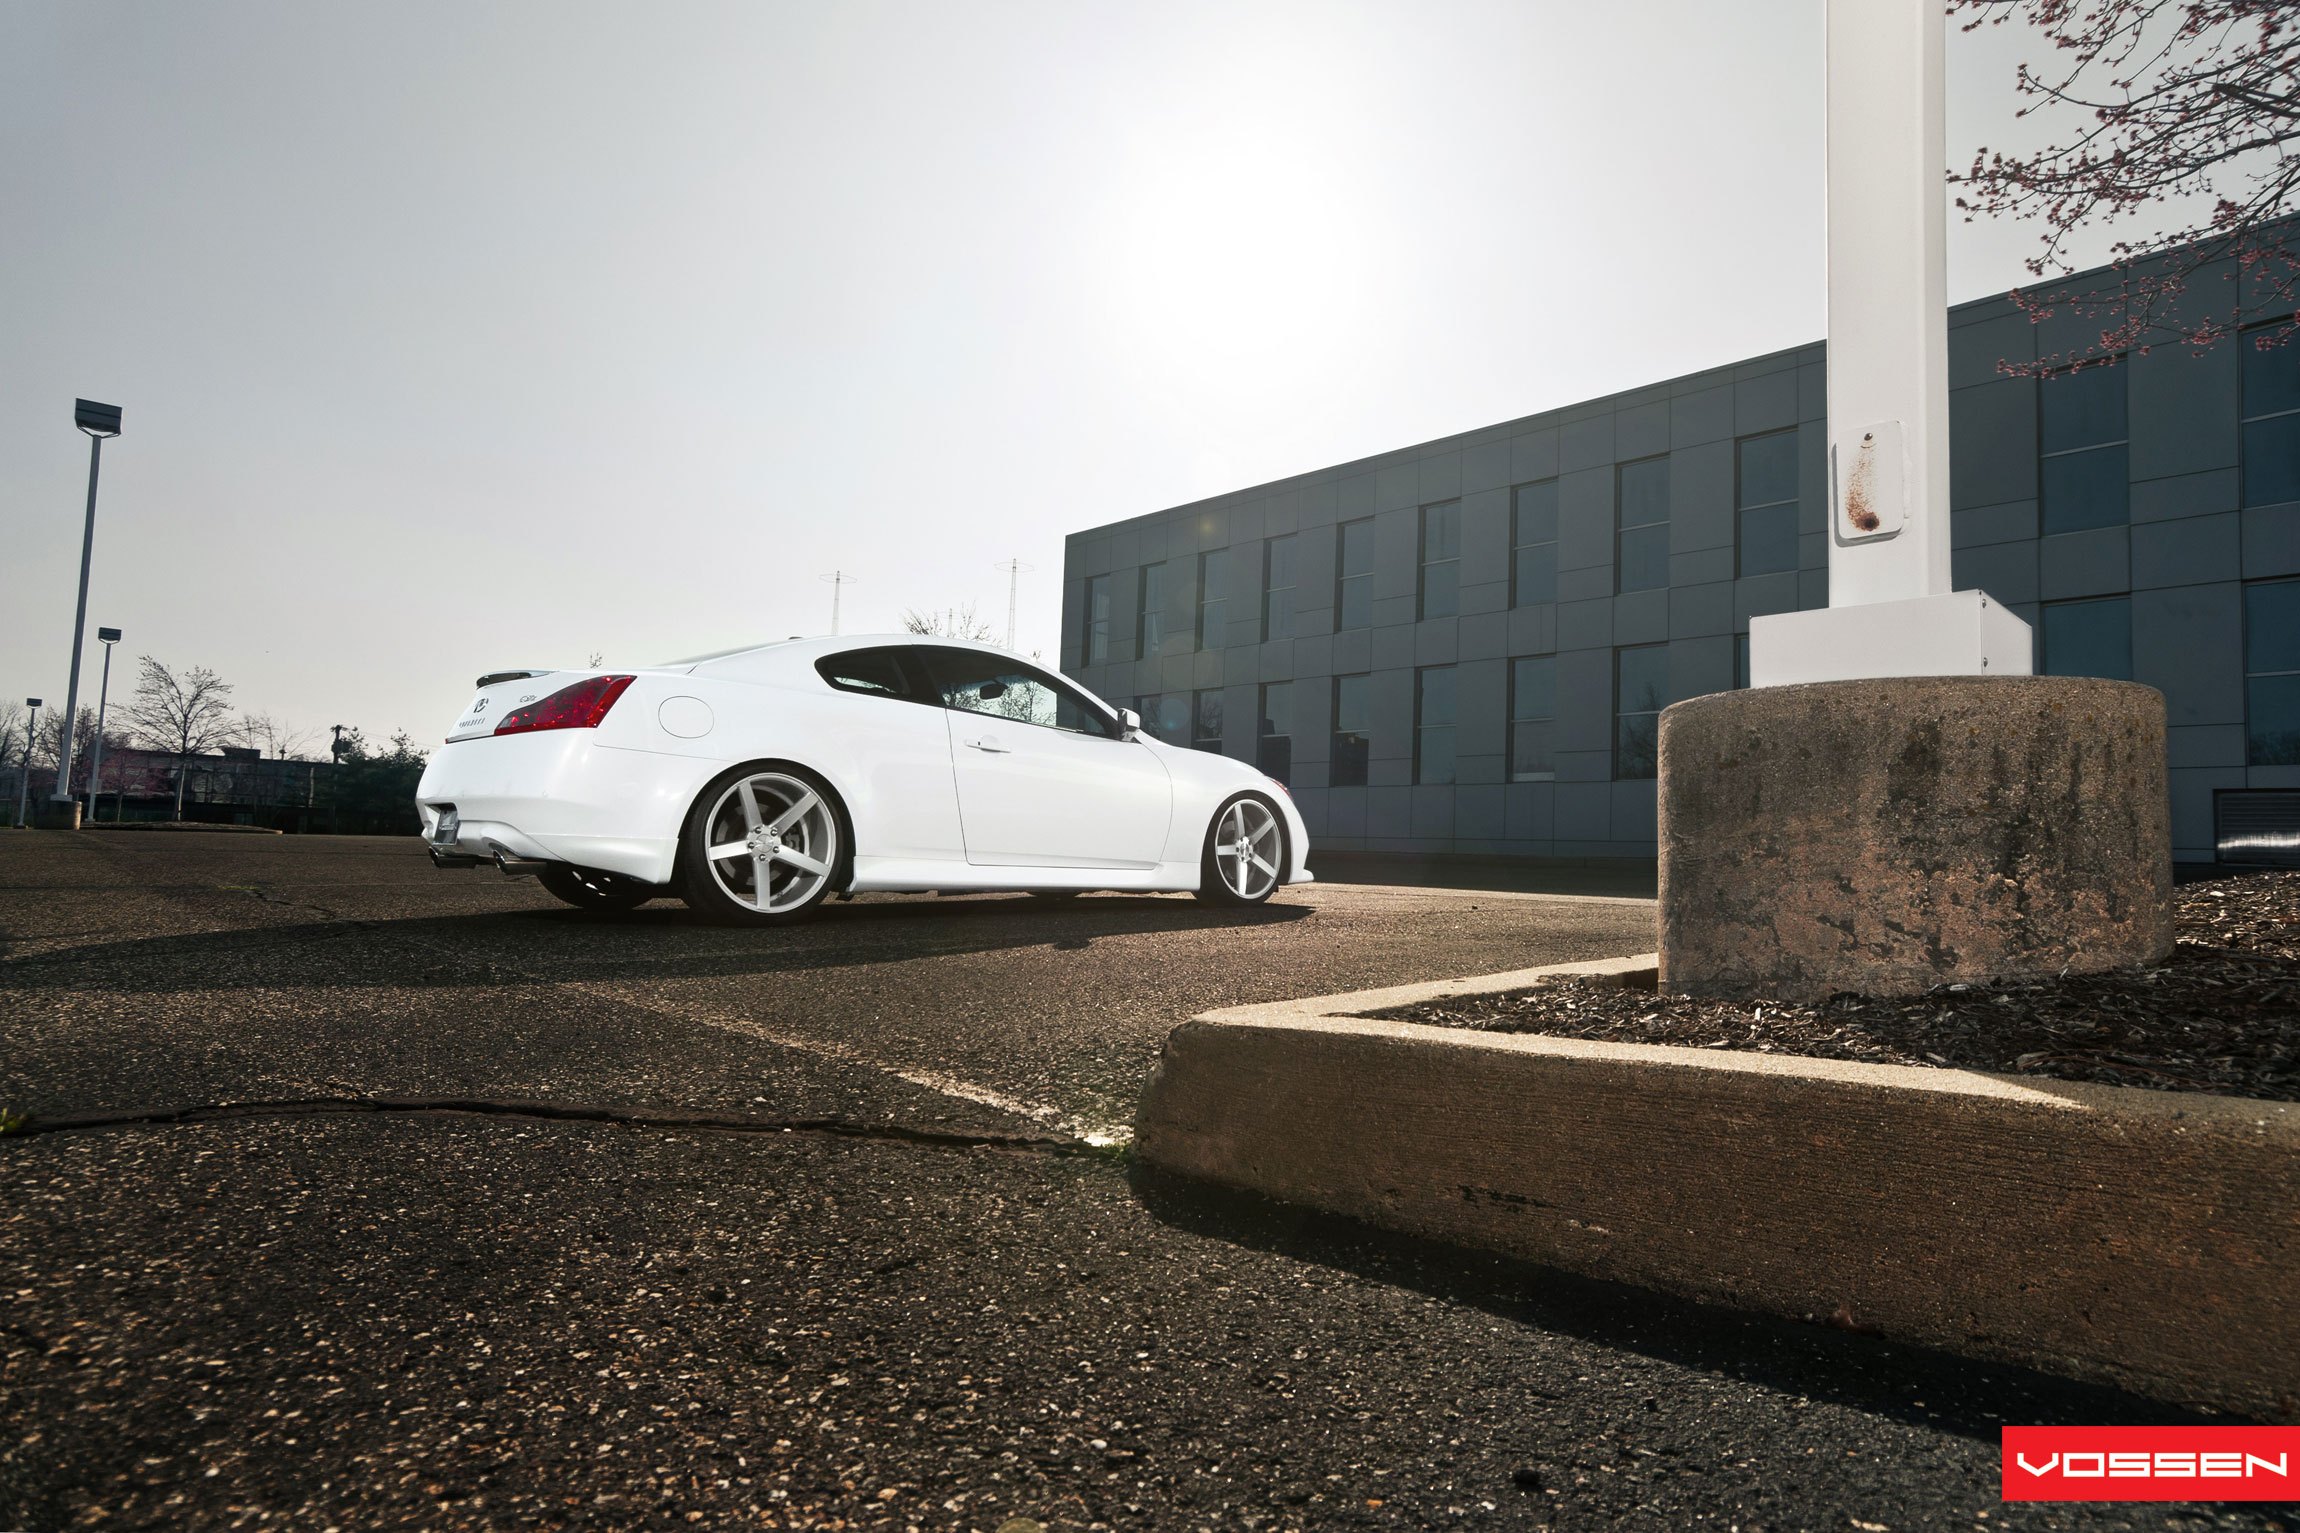 White Infiniti G37 with Factory Style Rear Spoiler - Photo by Vossen